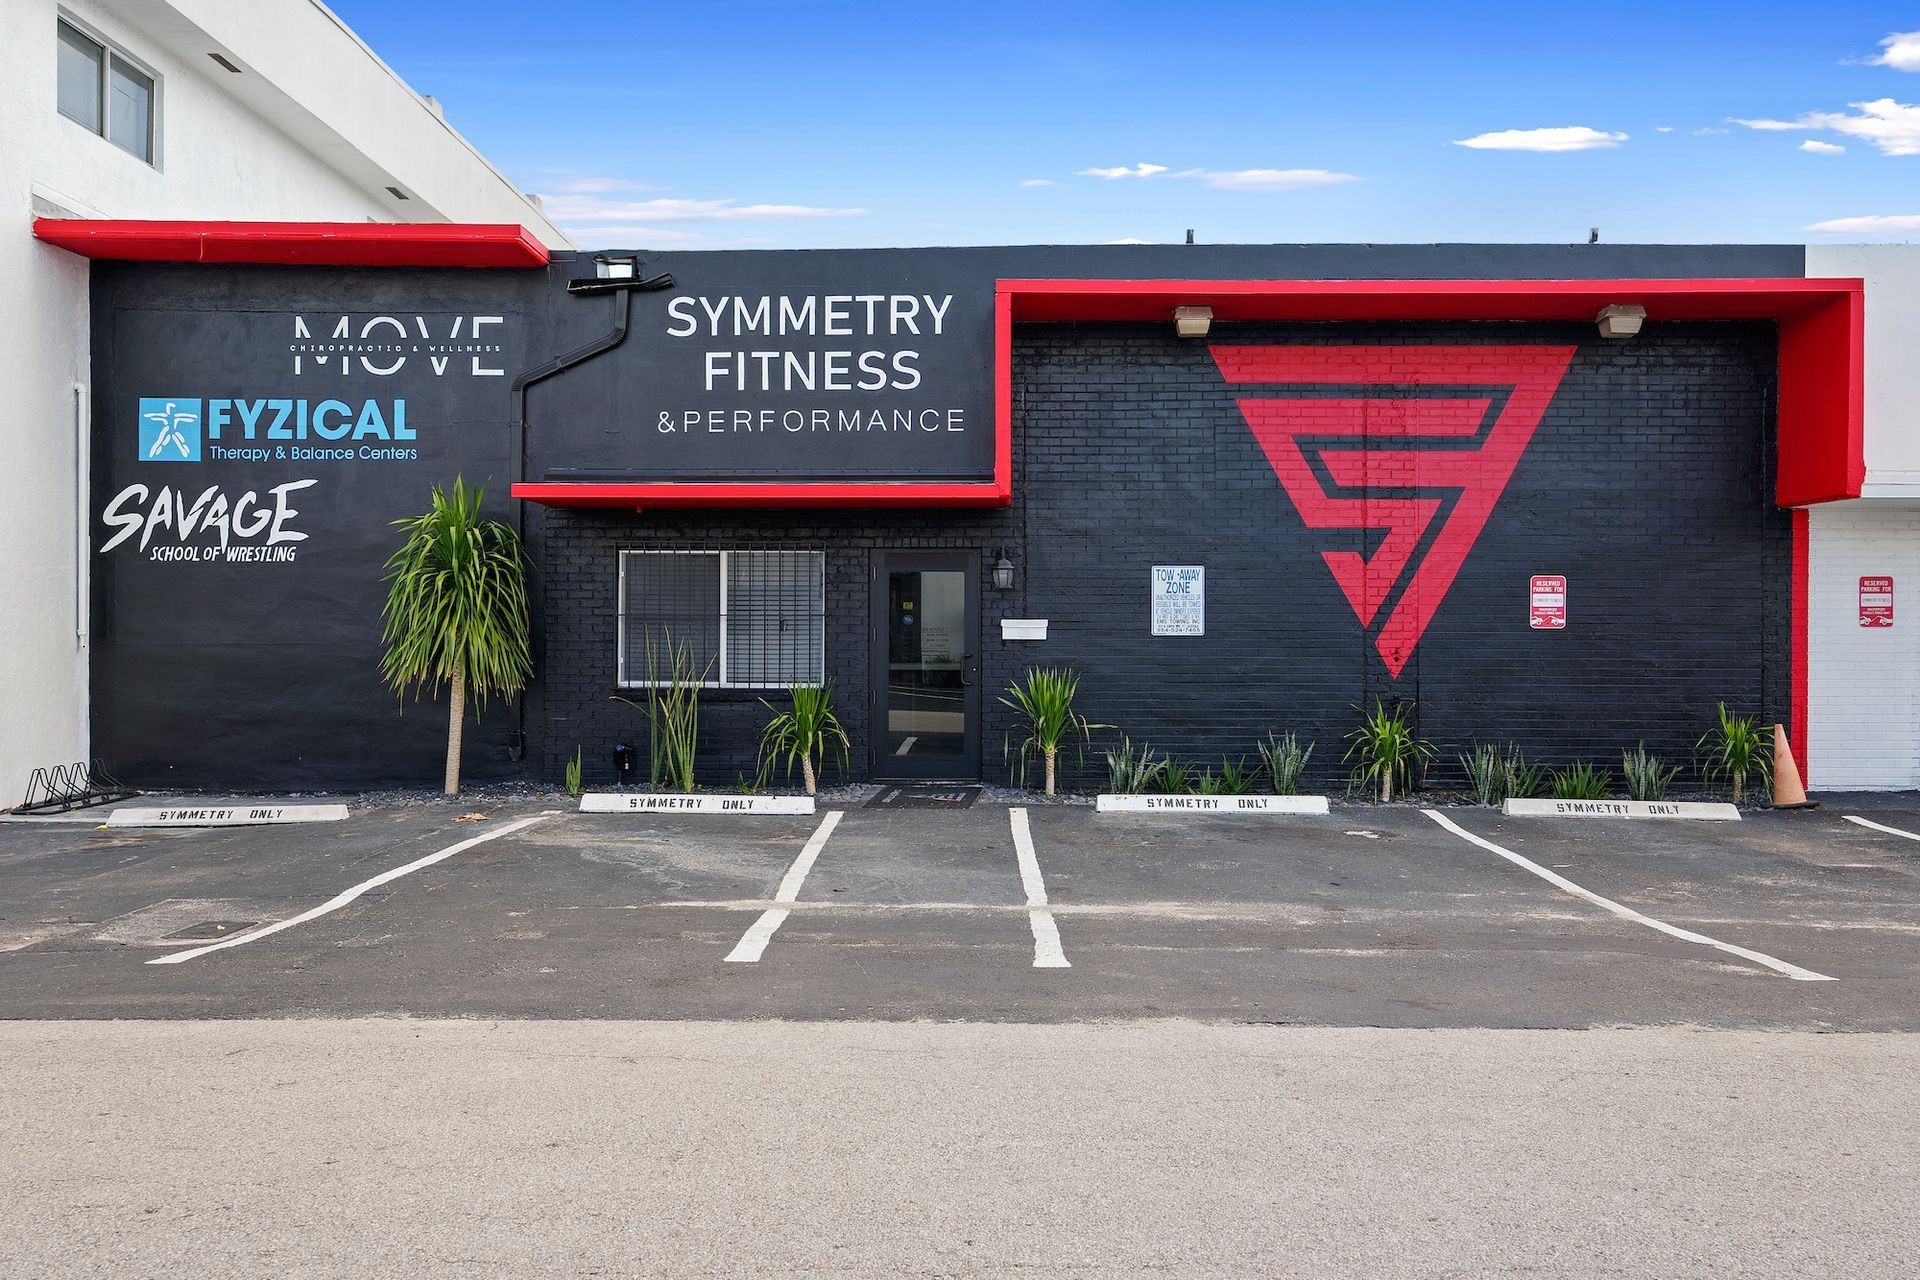 A gym called symmetry fitness has a parking lot in front of it